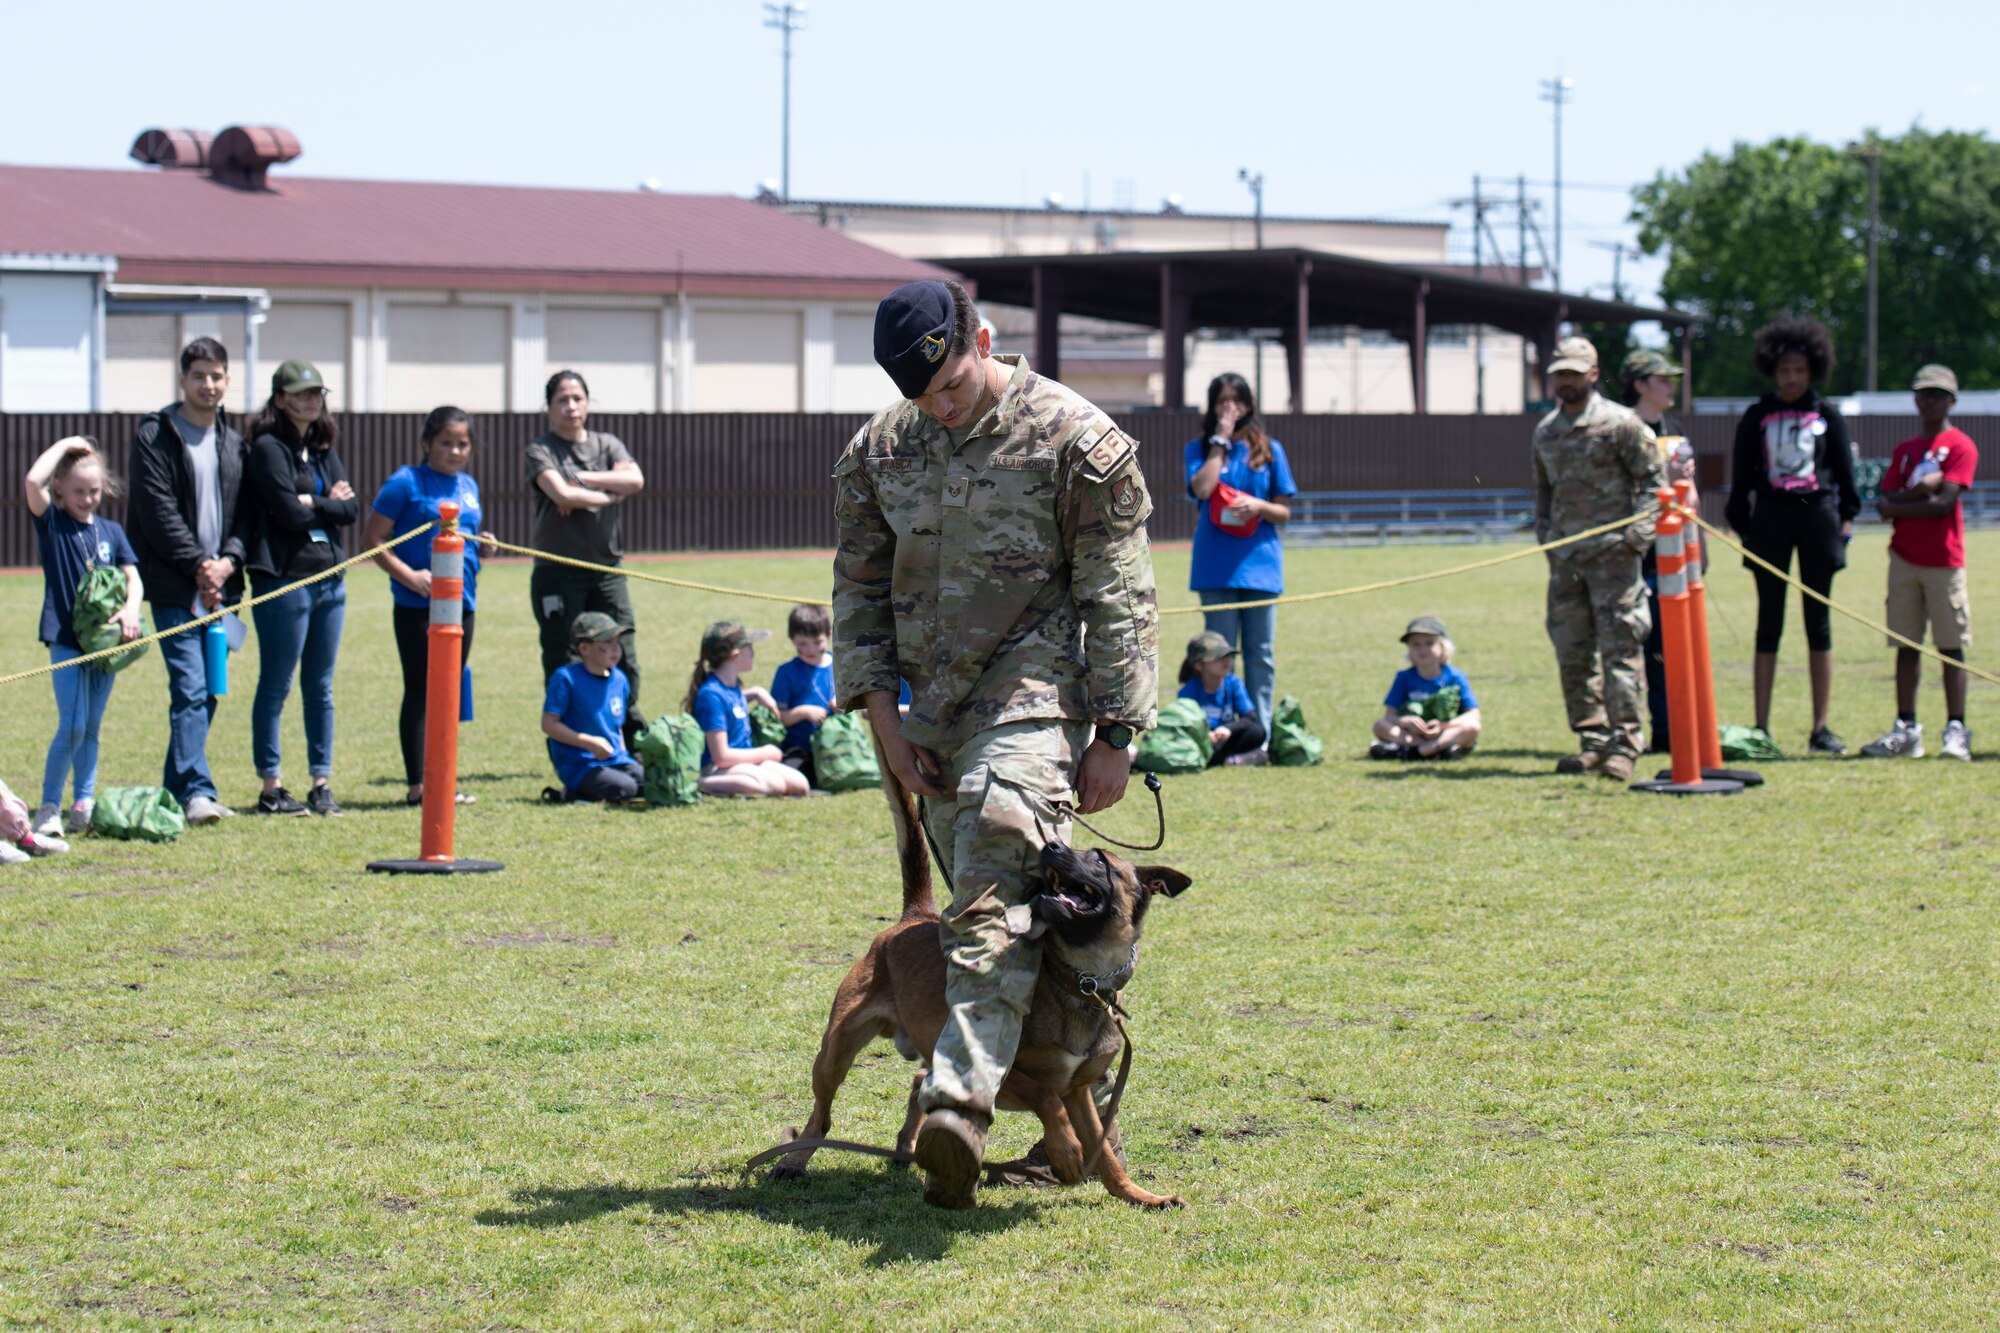 Staff Sgt. Marcello Frasca, 374th Security Forces Squadron military working dog handler, and Rroswell, MWD, perform a demonstration during Operation Kids Understanding Deployment Operations at Yokota Air Base, Japan, April 30, 2022. During Operation K.U.D.O.S., children performed a variety of deployment like exercises to help gain a knowledge of the setting their family may face. (U.S. Air Force photo by Tech. Sgt. Joshua Edwards)